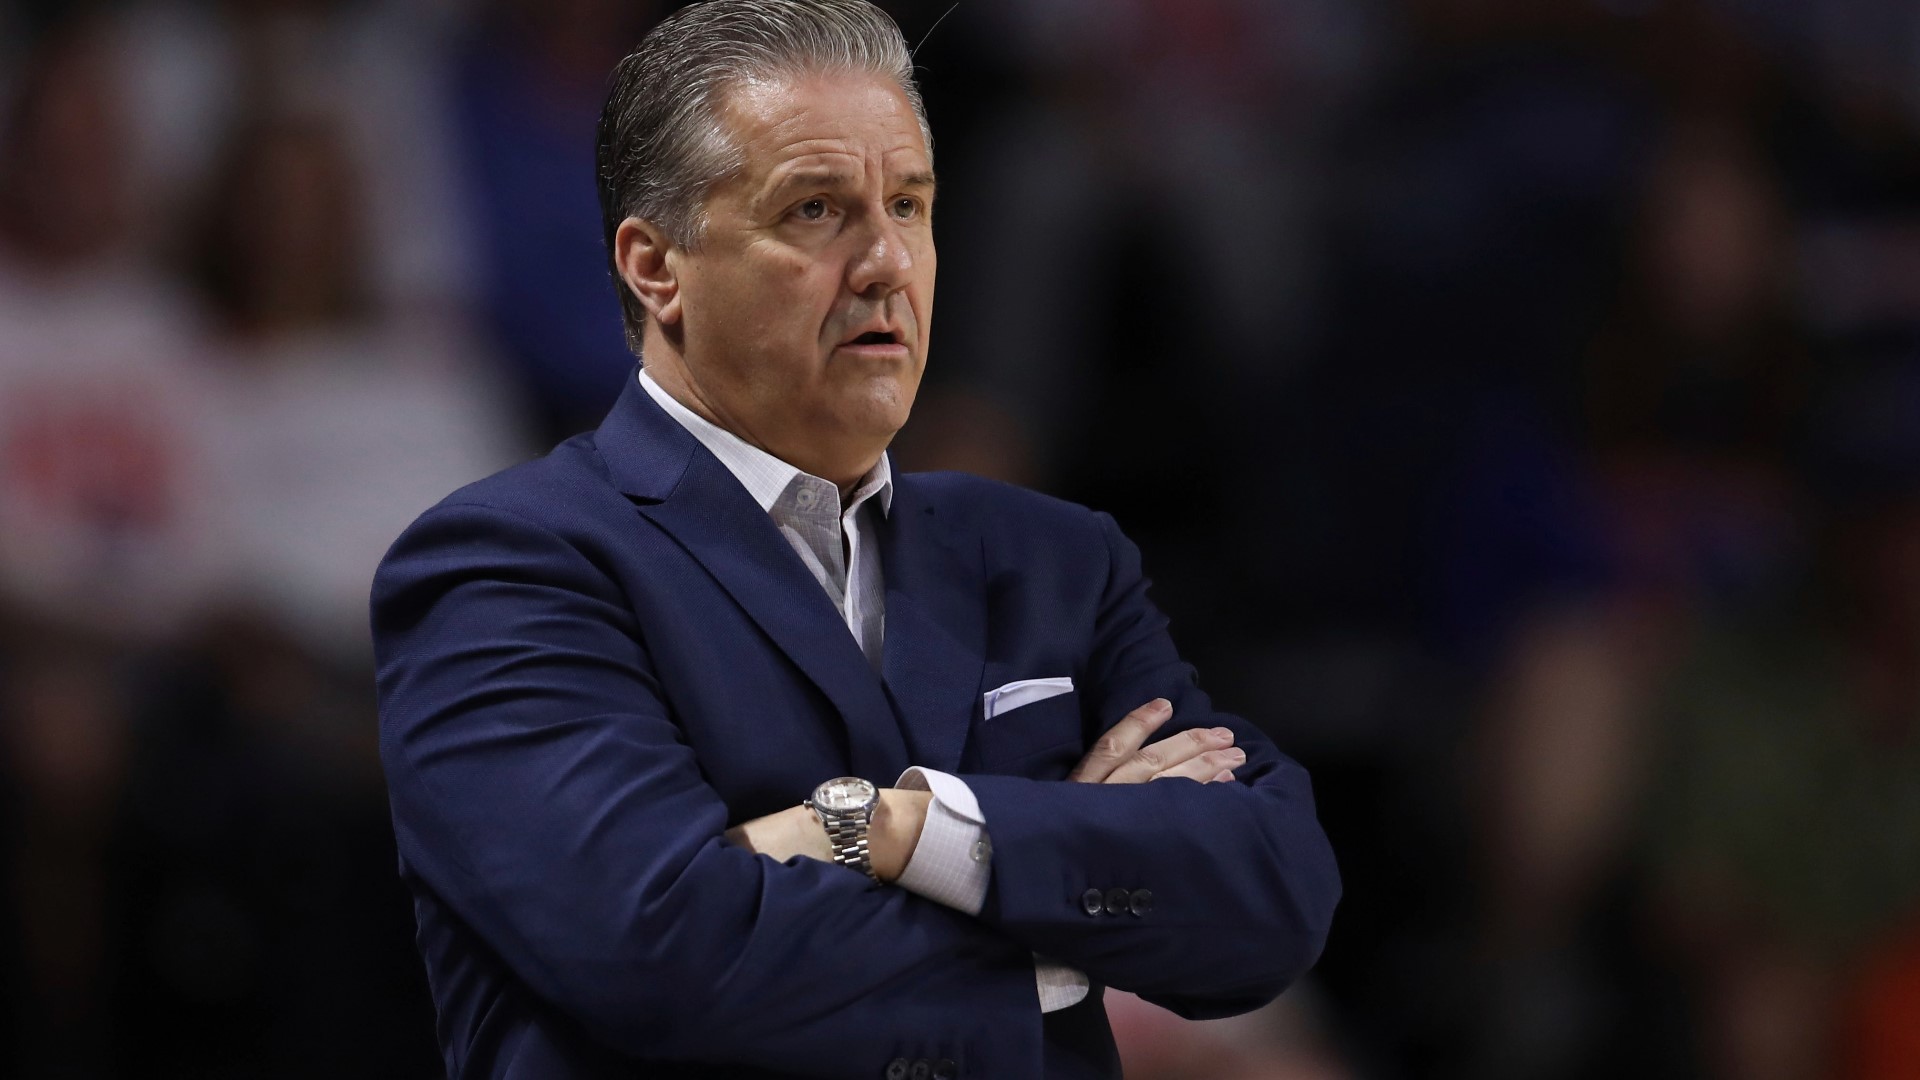 Many fans were frustrated Monday night after UK's tough loss against Alabama, even calling for Calipari to step aside.